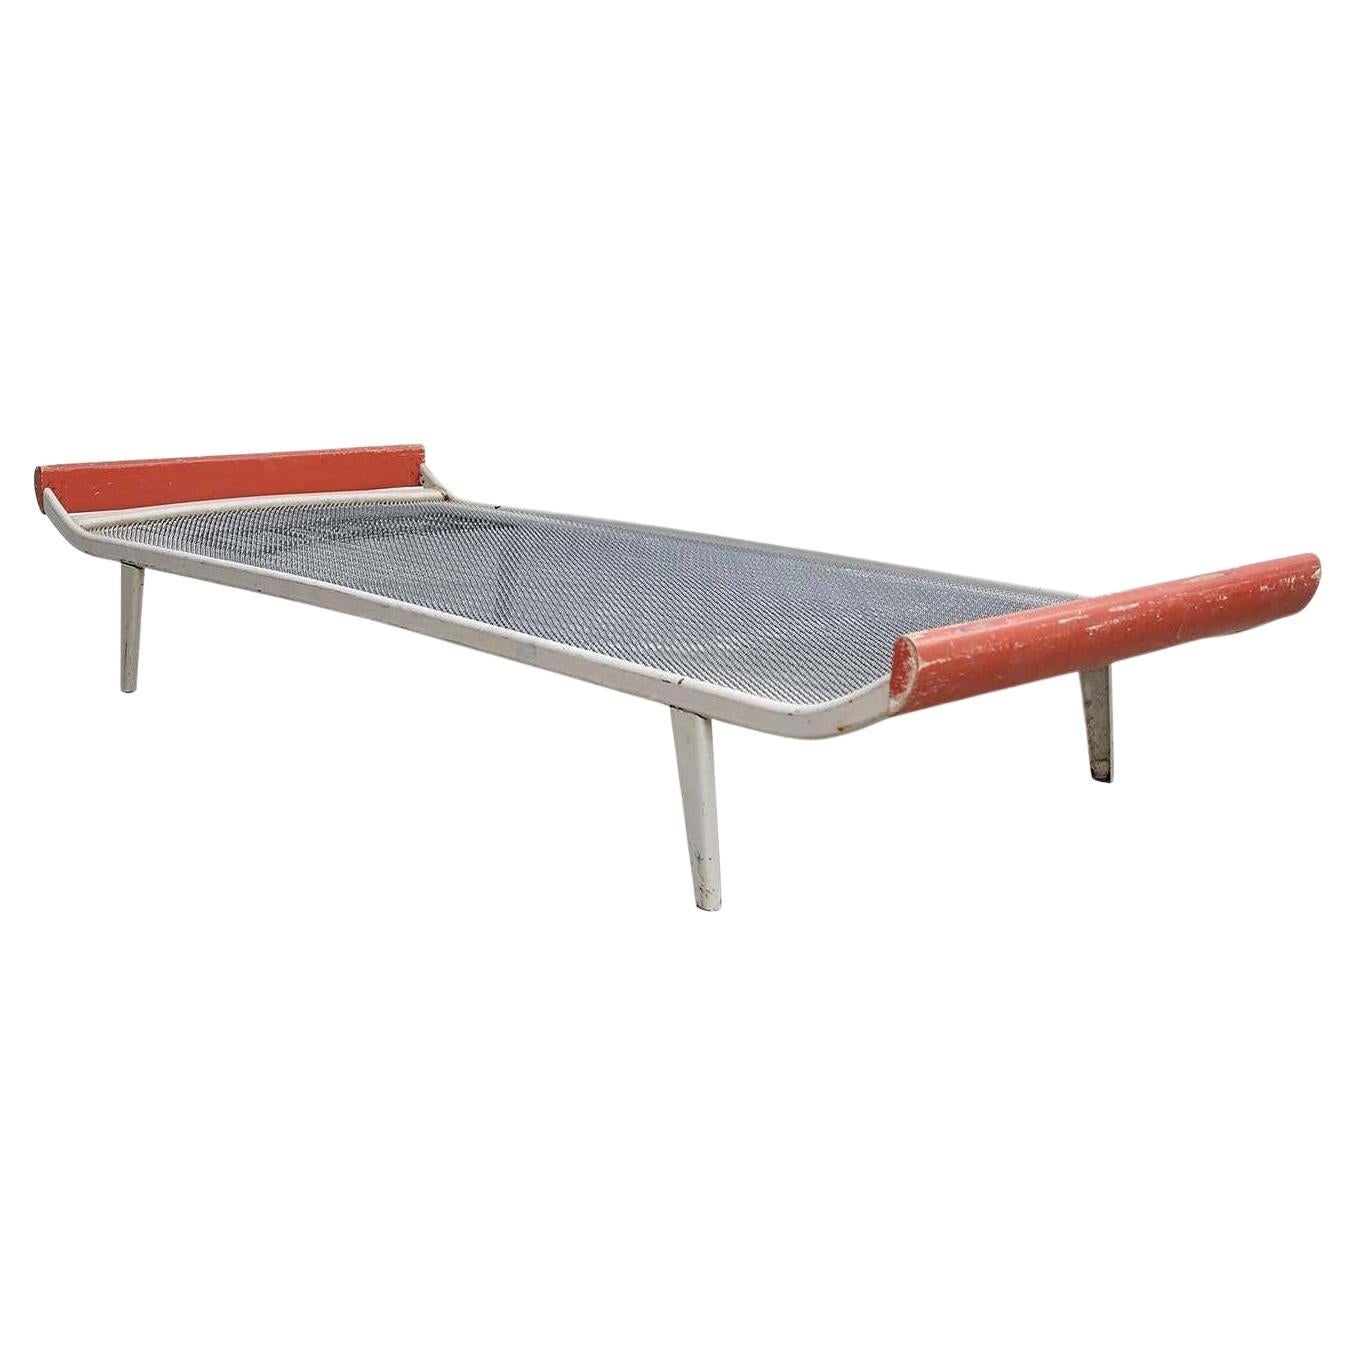 Dick Cordemeijer Mid-Century Modern Metal and Wood Daybed Cleopatra, circa 1950 For Sale